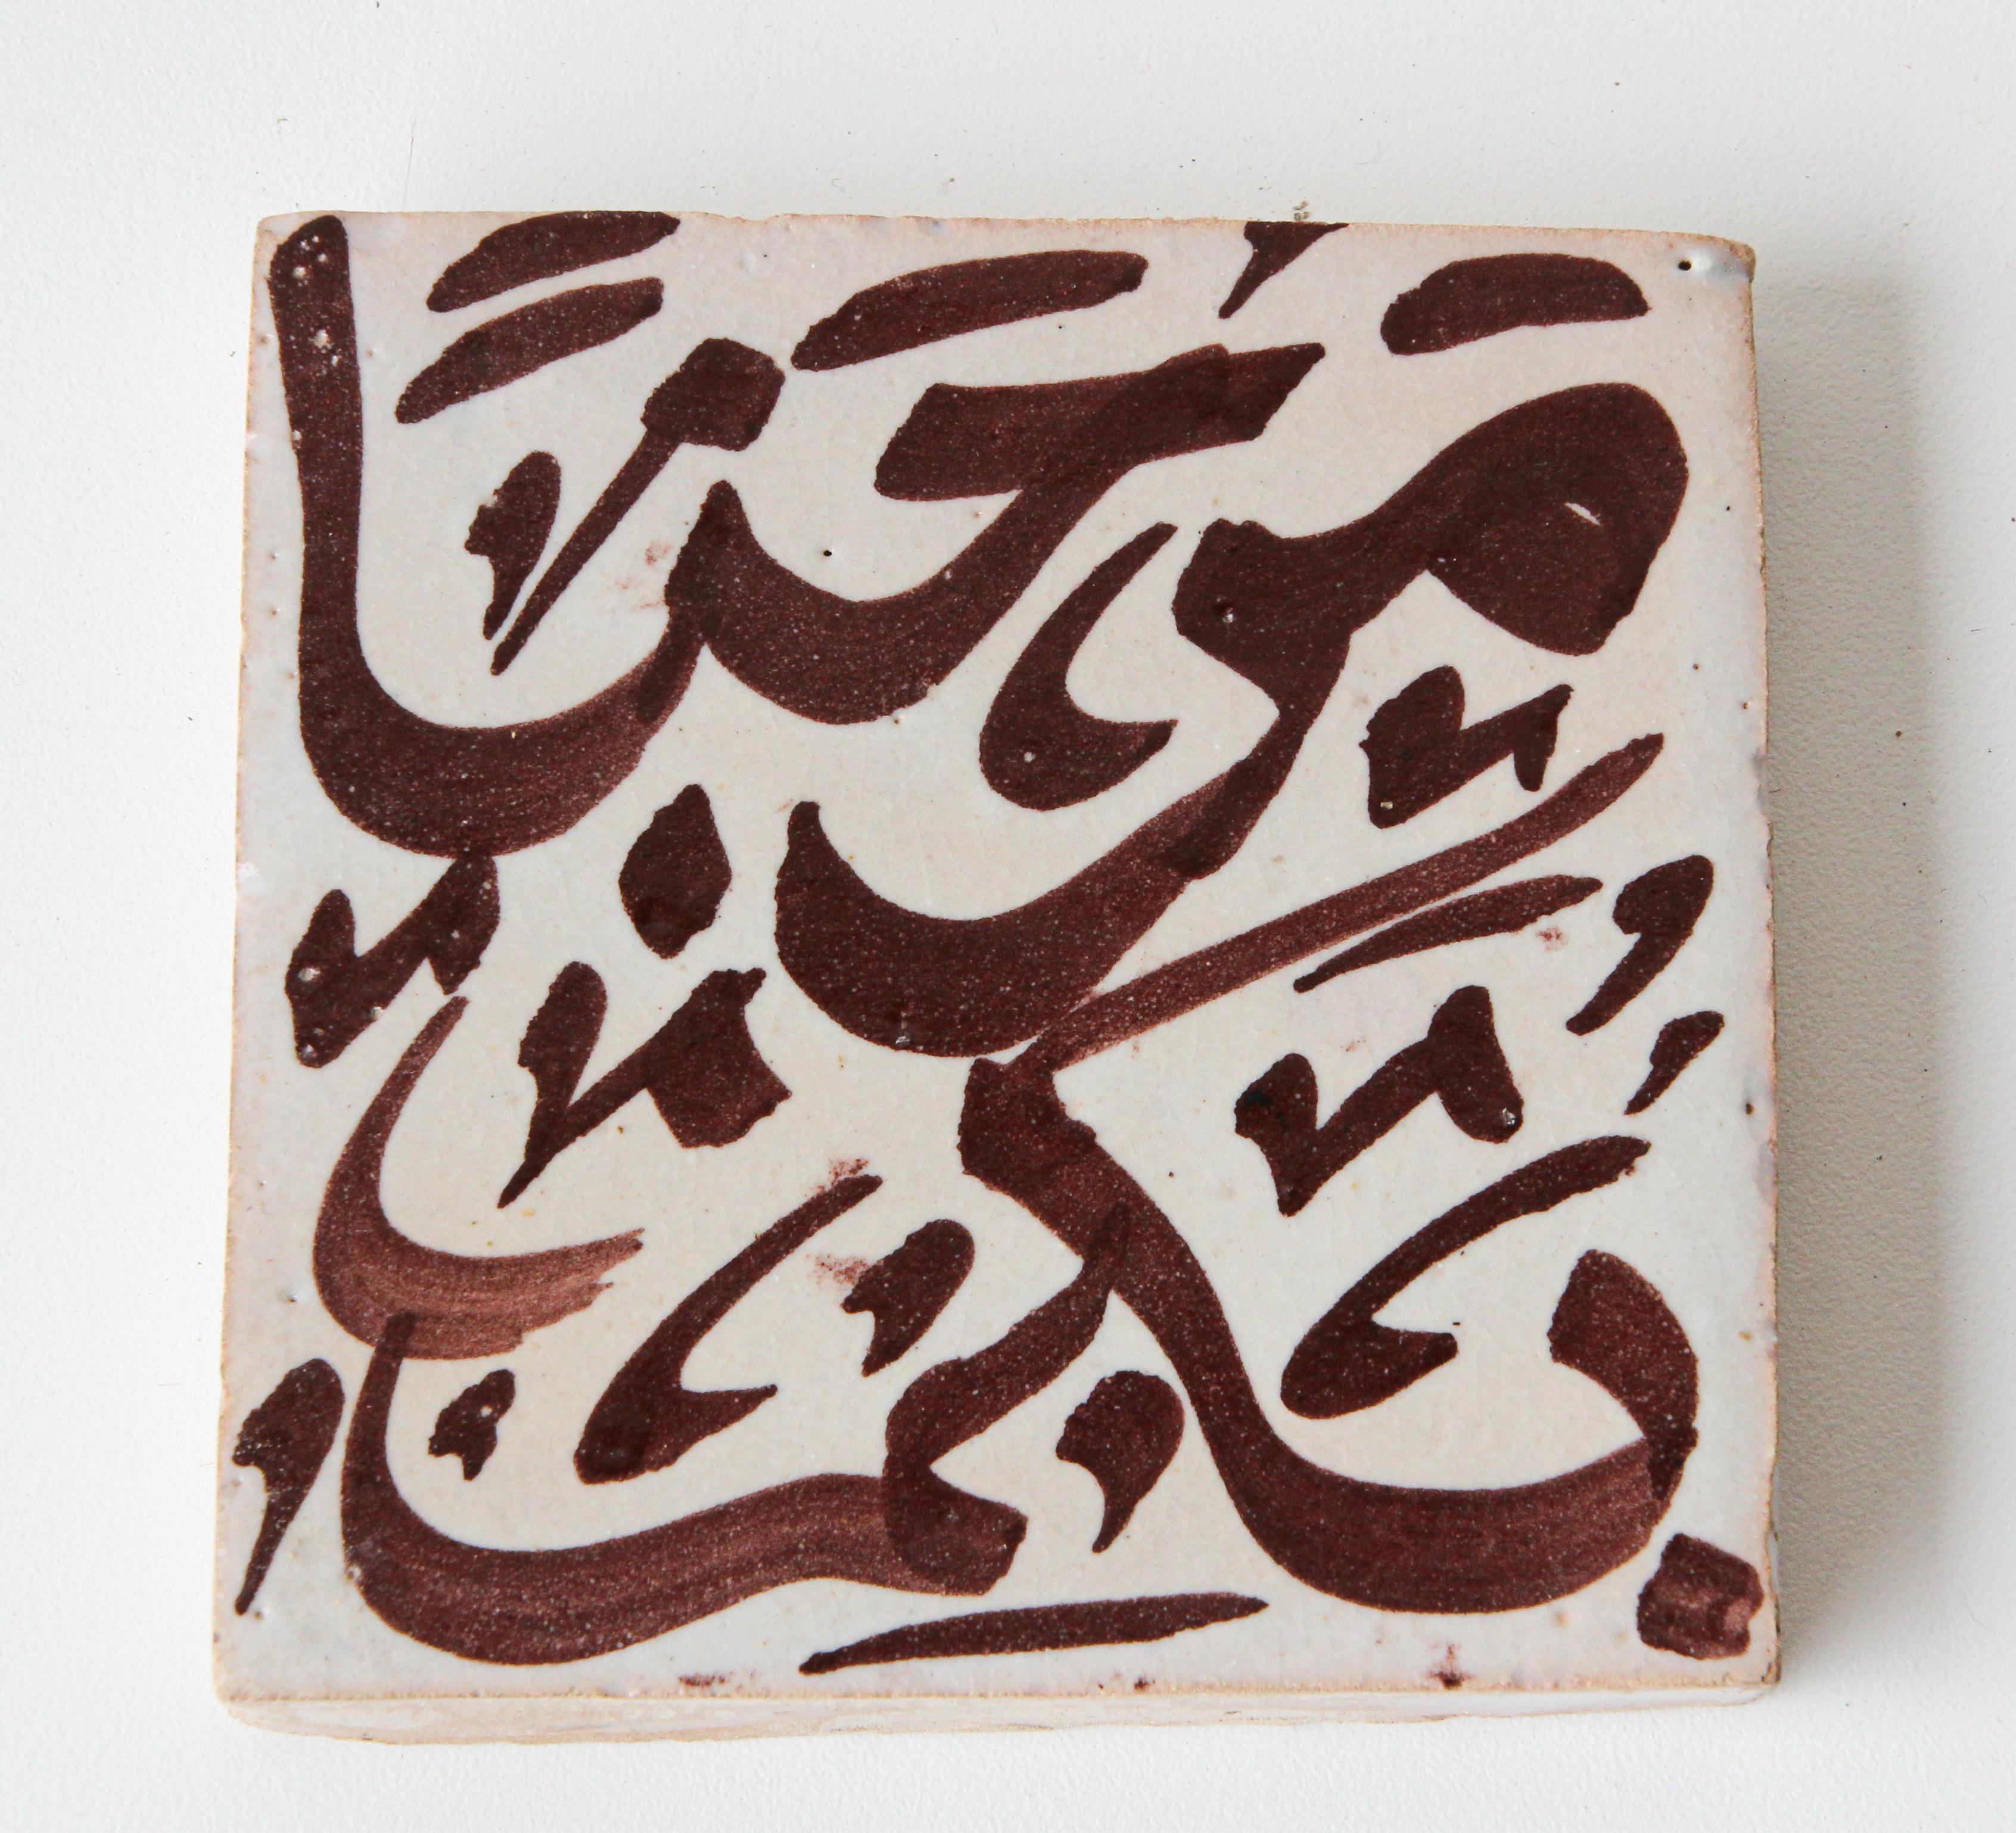 Moroccan handcrafted decorative tile with hand painted Arabic writing in brown on ivory crackle glazed ceramic.
Arabic writing on ceramic tile hand painted by artist in Fez Morocco.
Great zellige decorative Moorish Artwork.
Writing in Arabic